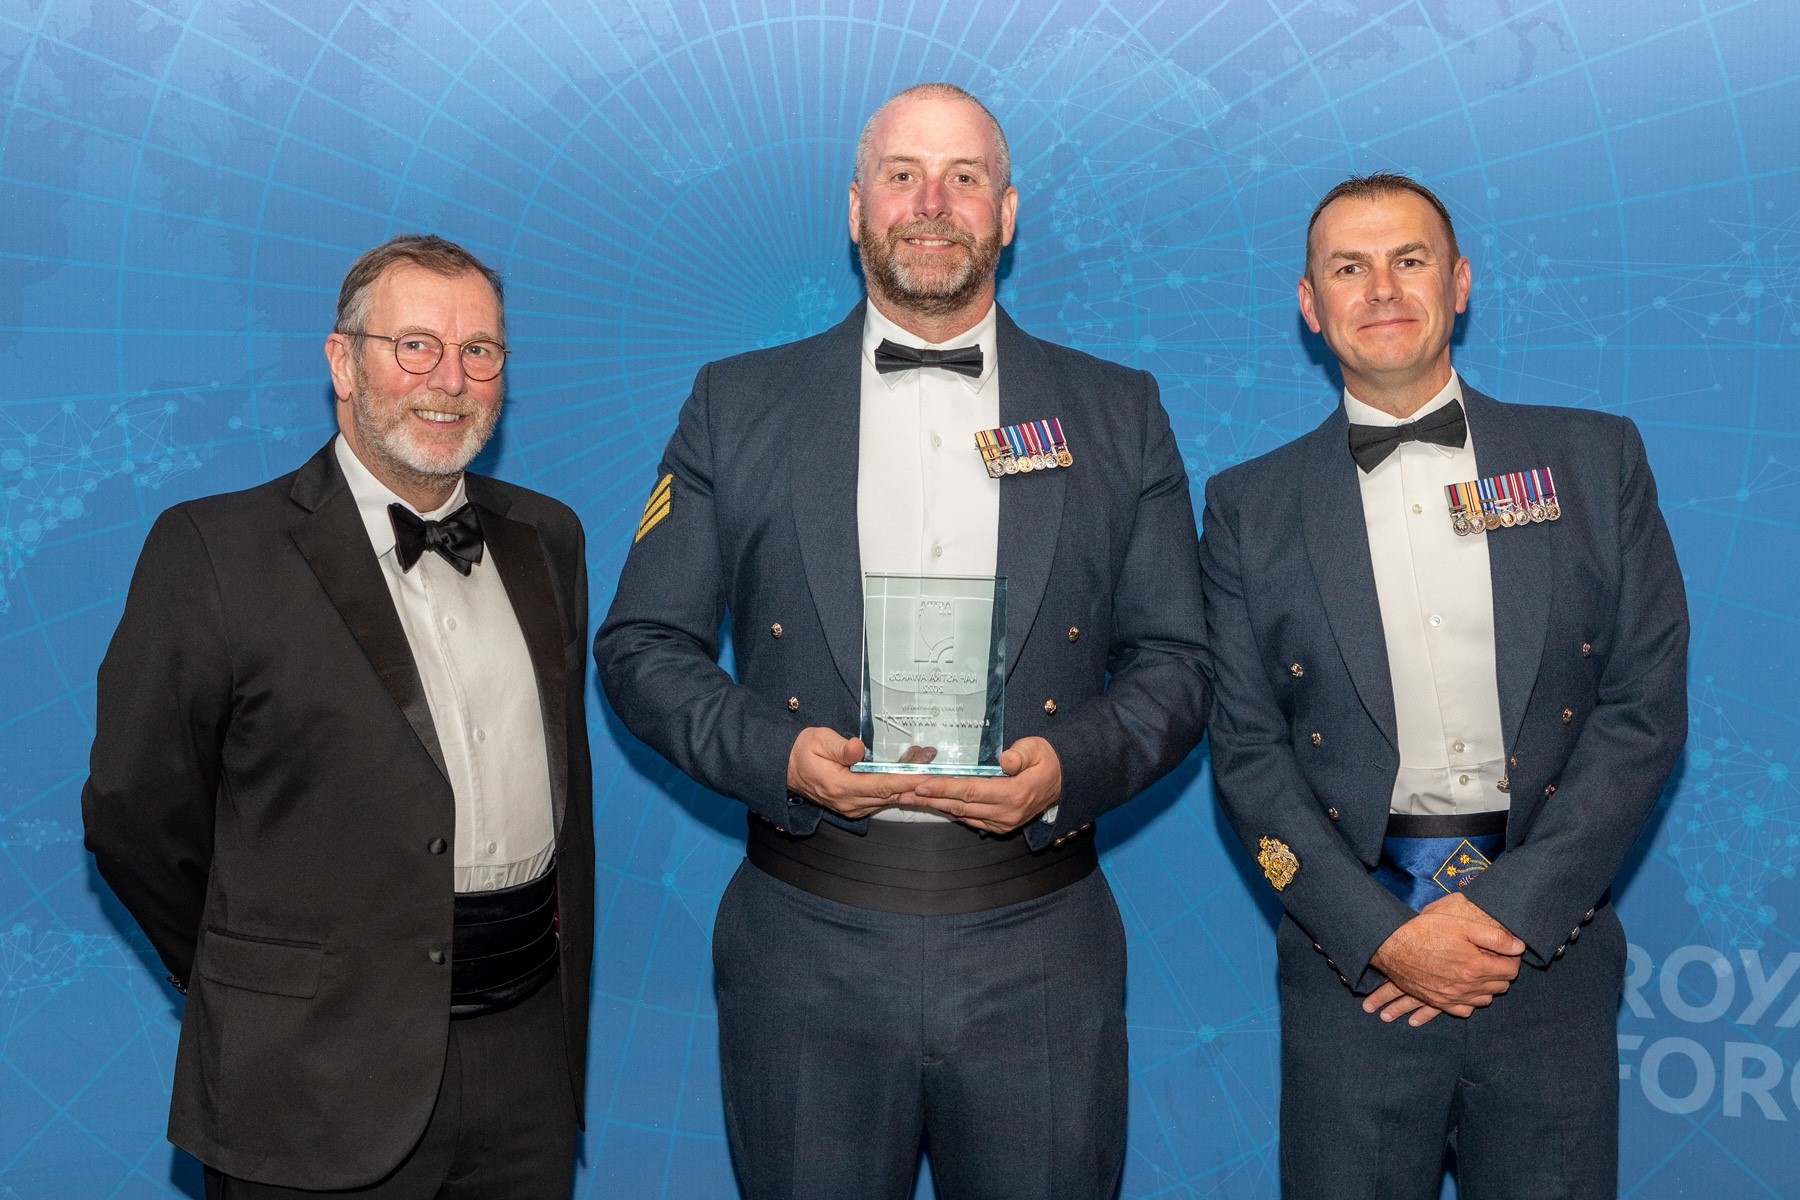 Image shows RAF aviator holding award for picture.